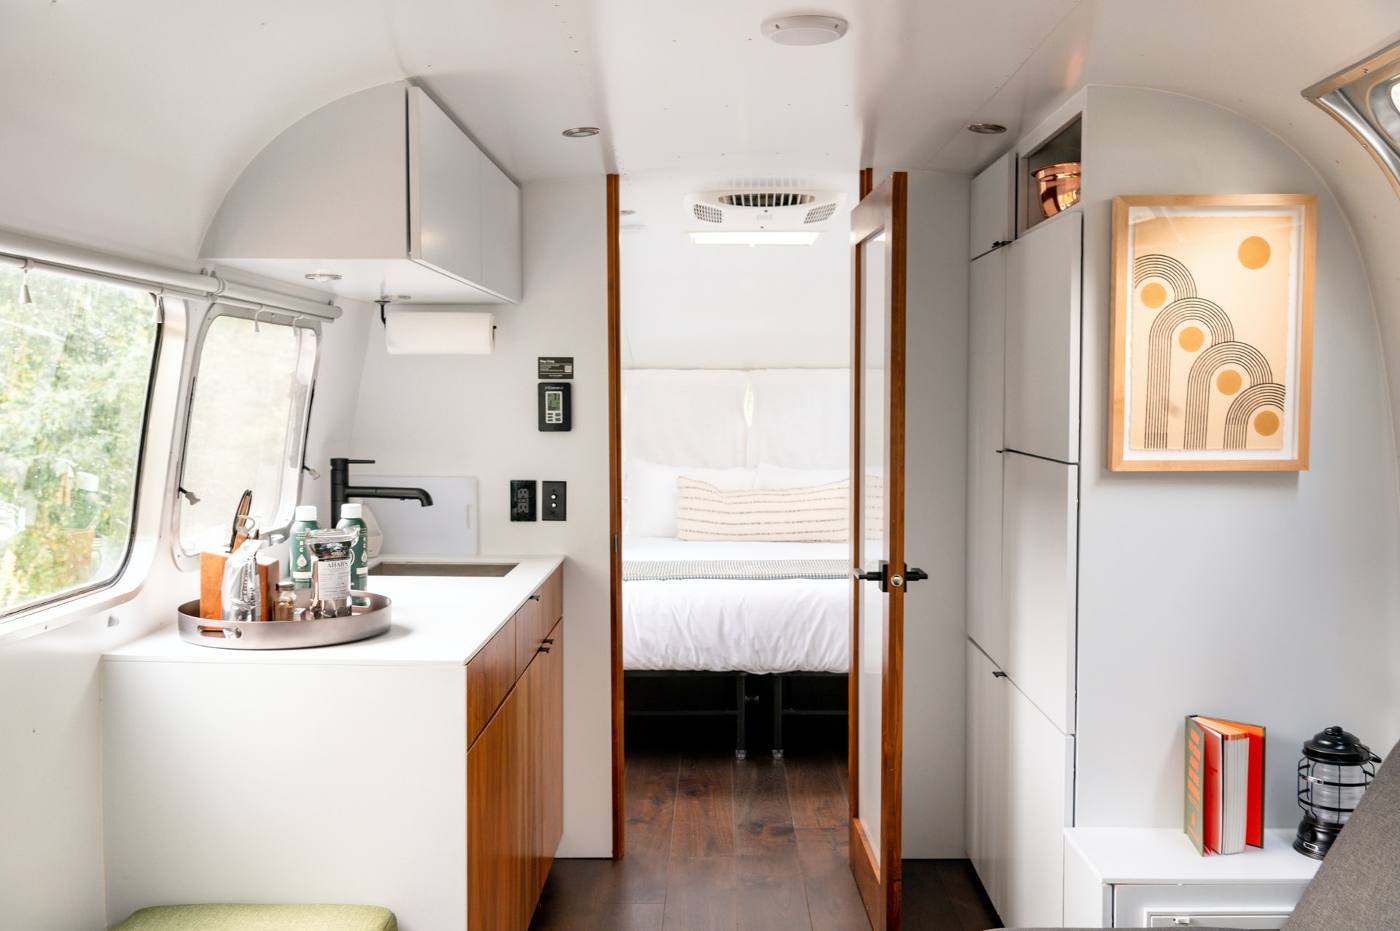 interior of tiny home trailer - complete guide to missouri tiny house laws